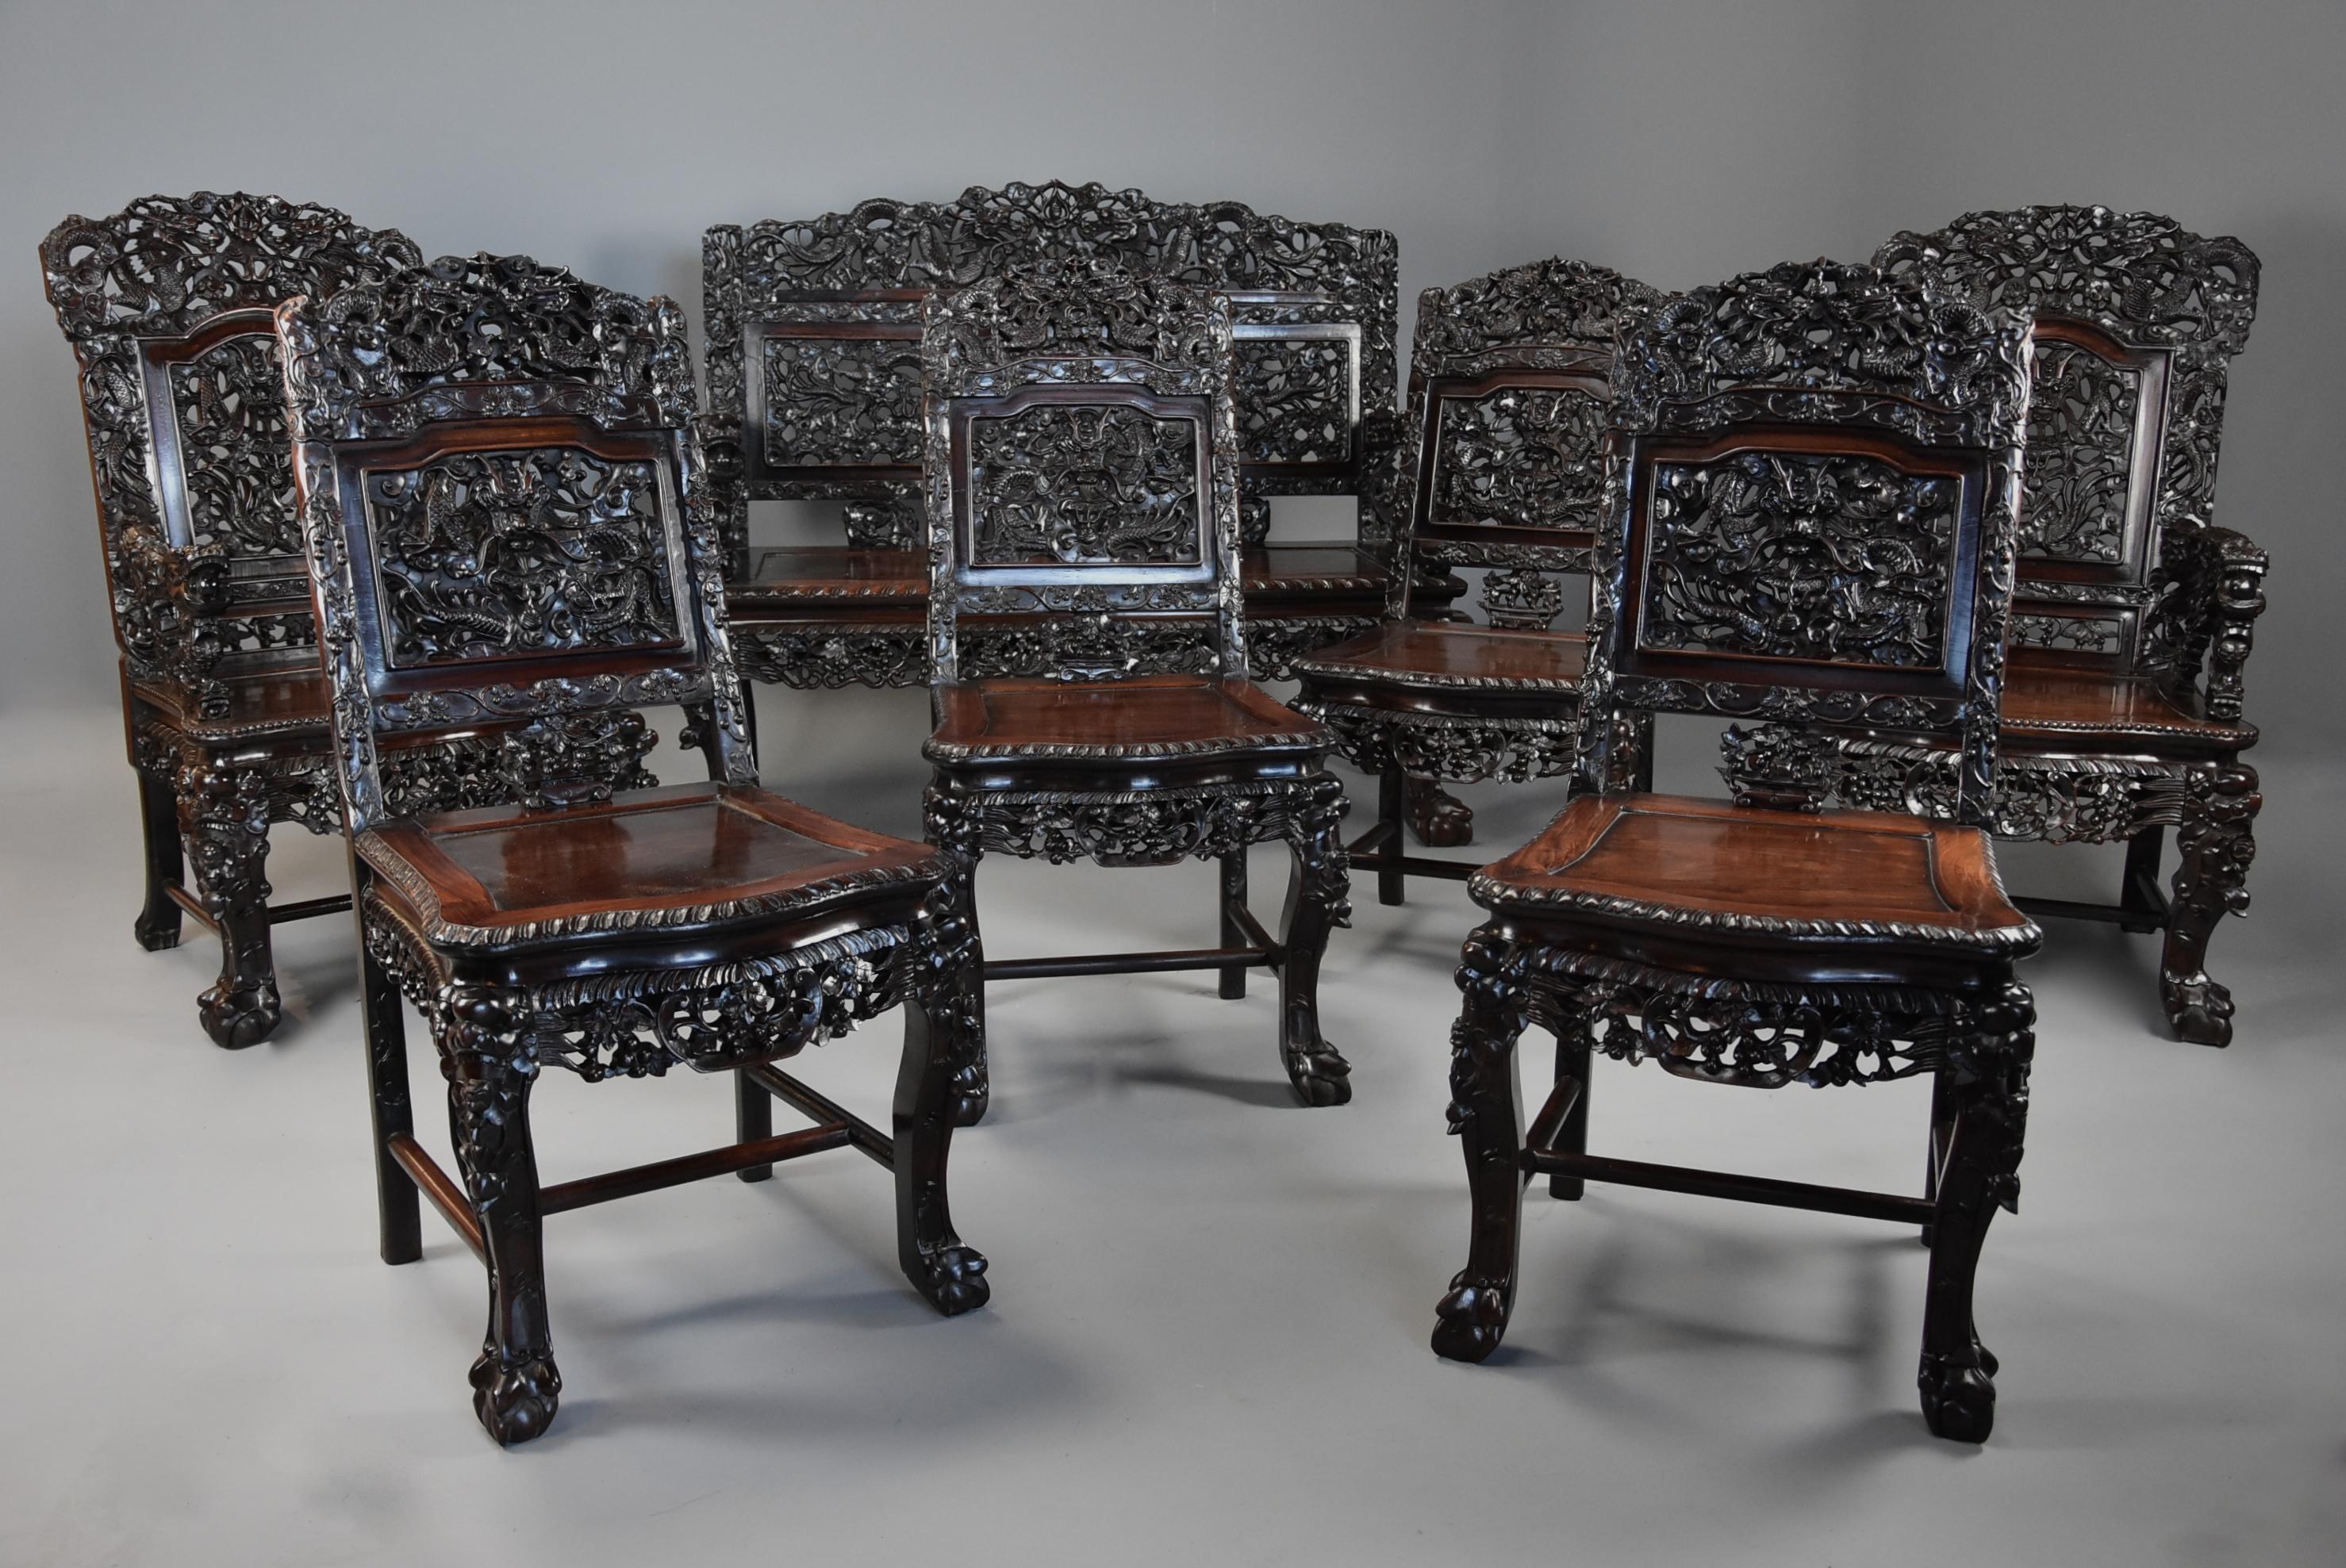 A superb quality late 19th century (circa 1880) Chinese profusely carved padouk seven piece suite.

This suite consists of a two/three-seat bench, a pair of open armchairs and four single chairs, all of exceptional quality. 

Each of the pieces